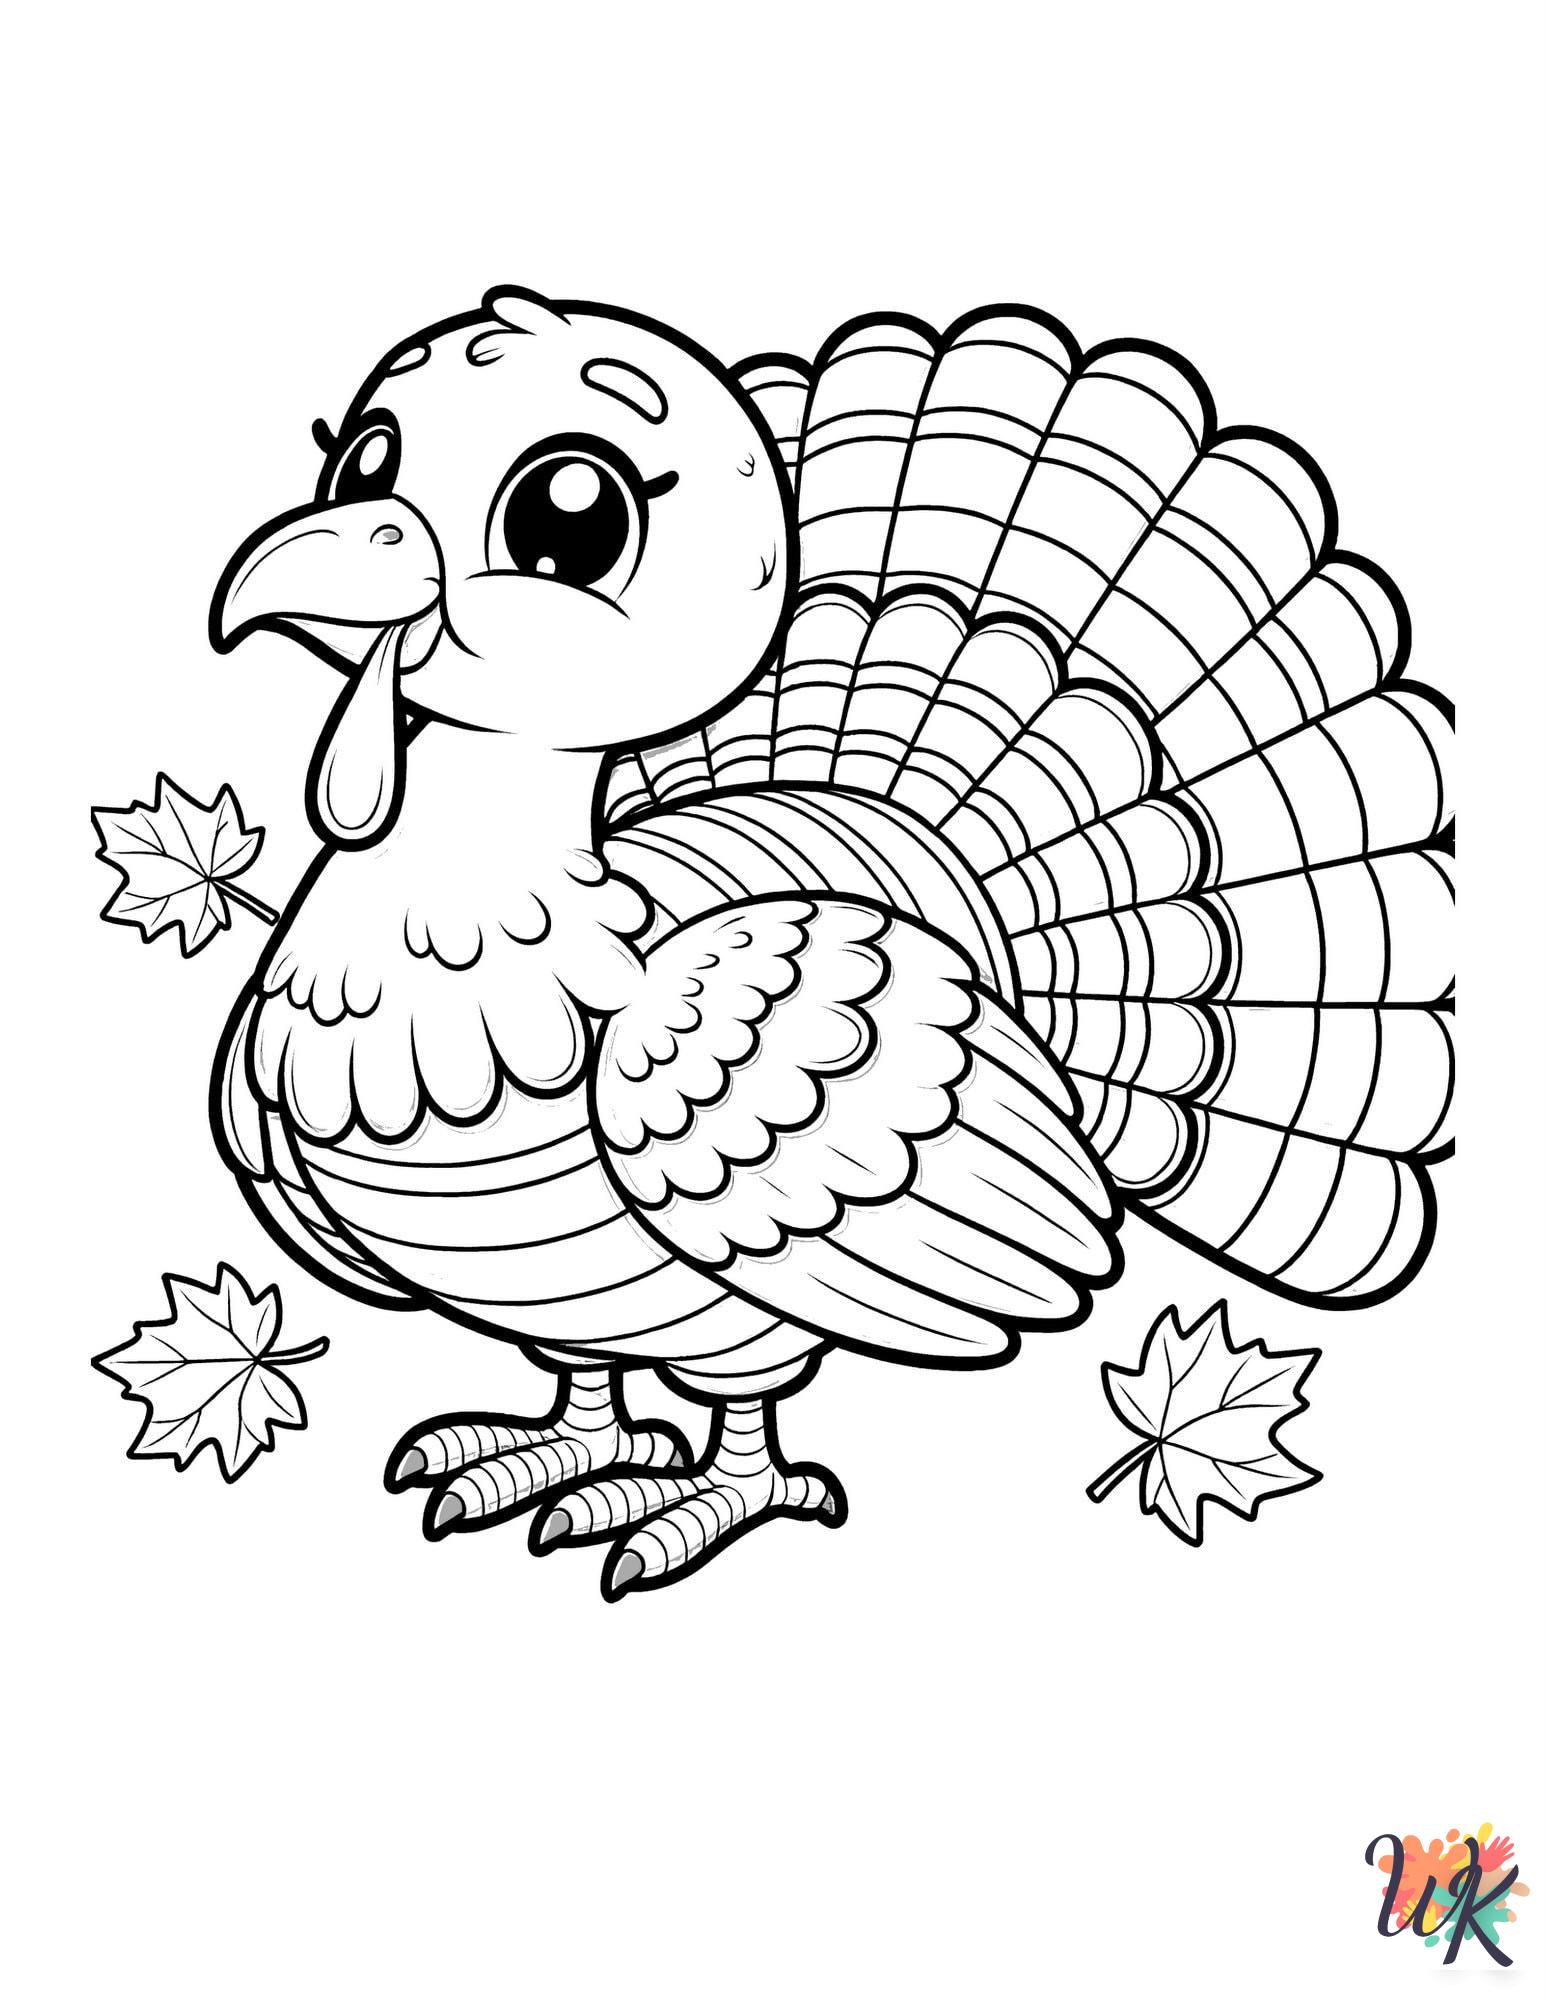 Turkey decorations coloring pages